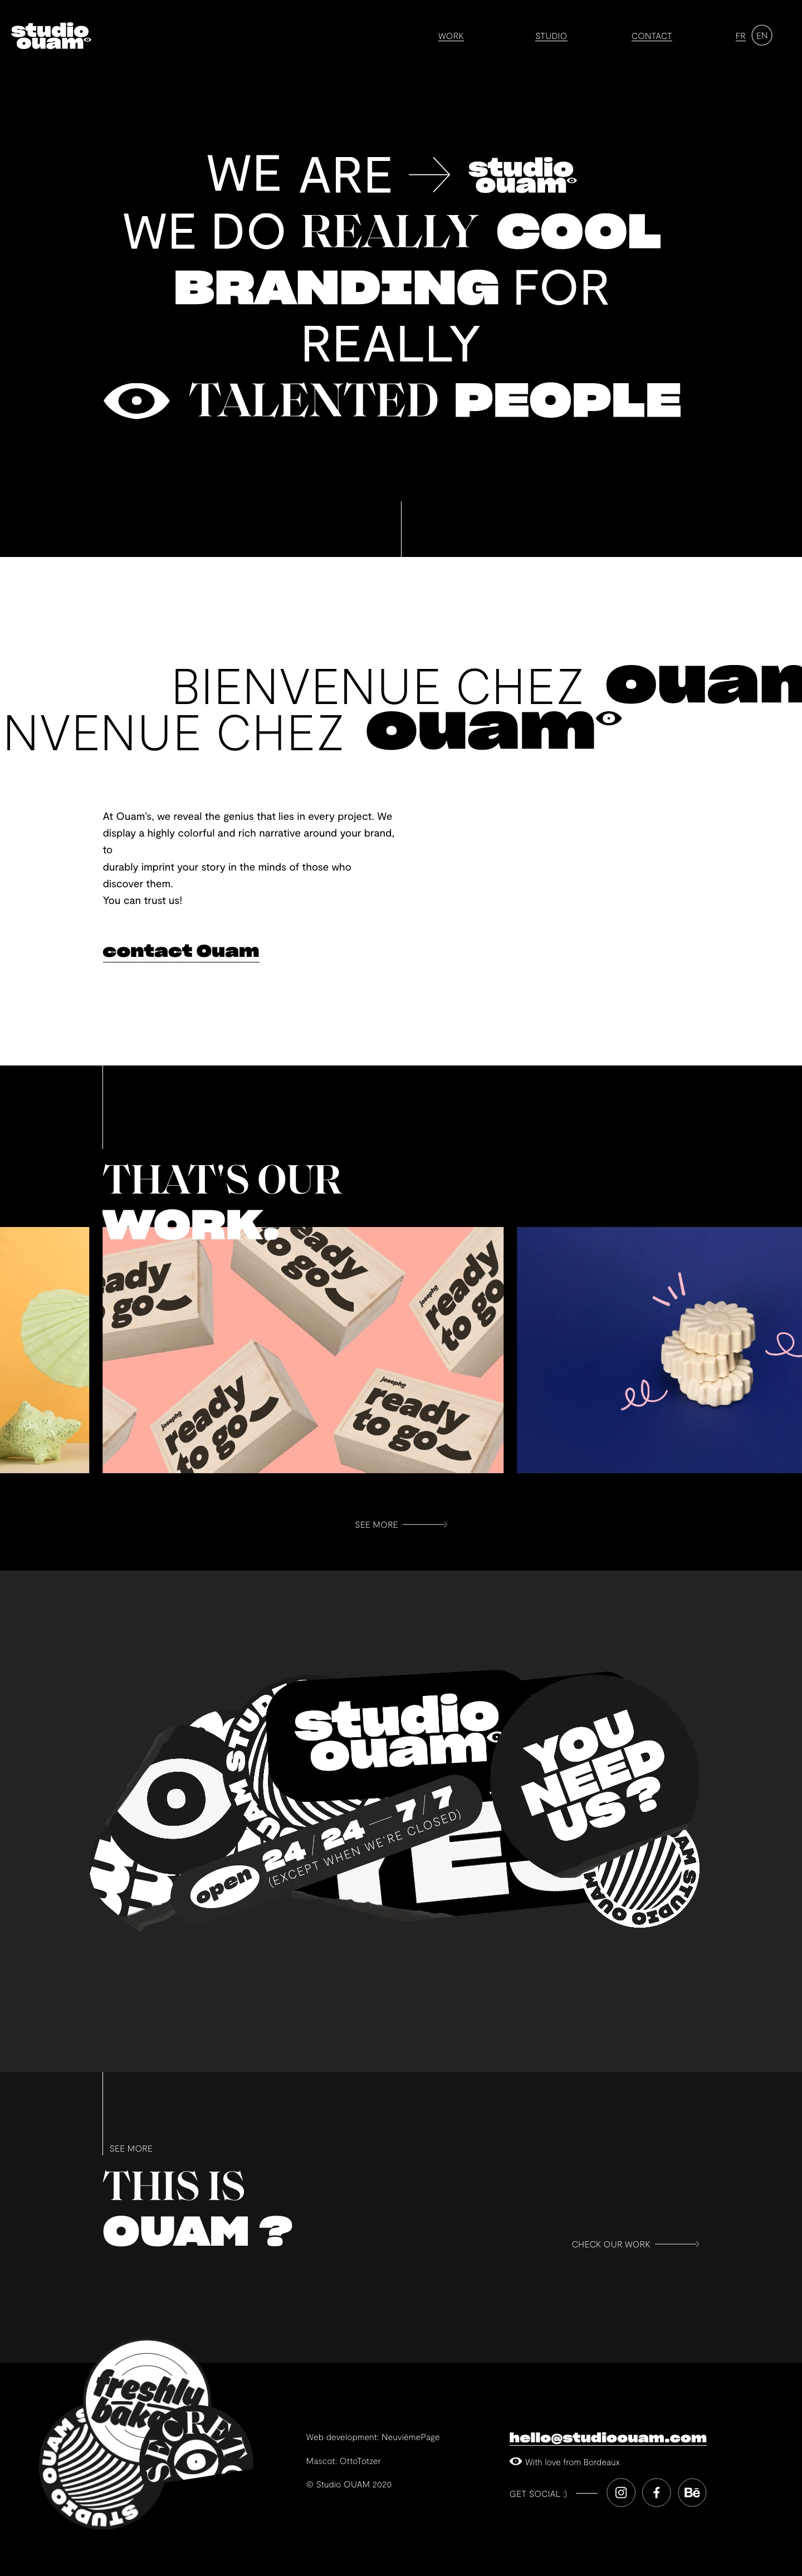 Studio Ouam Landing Page Example: Studio OUAM is a communication agency based between Paris and Bordeaux specialized in visual identity and brand creation.